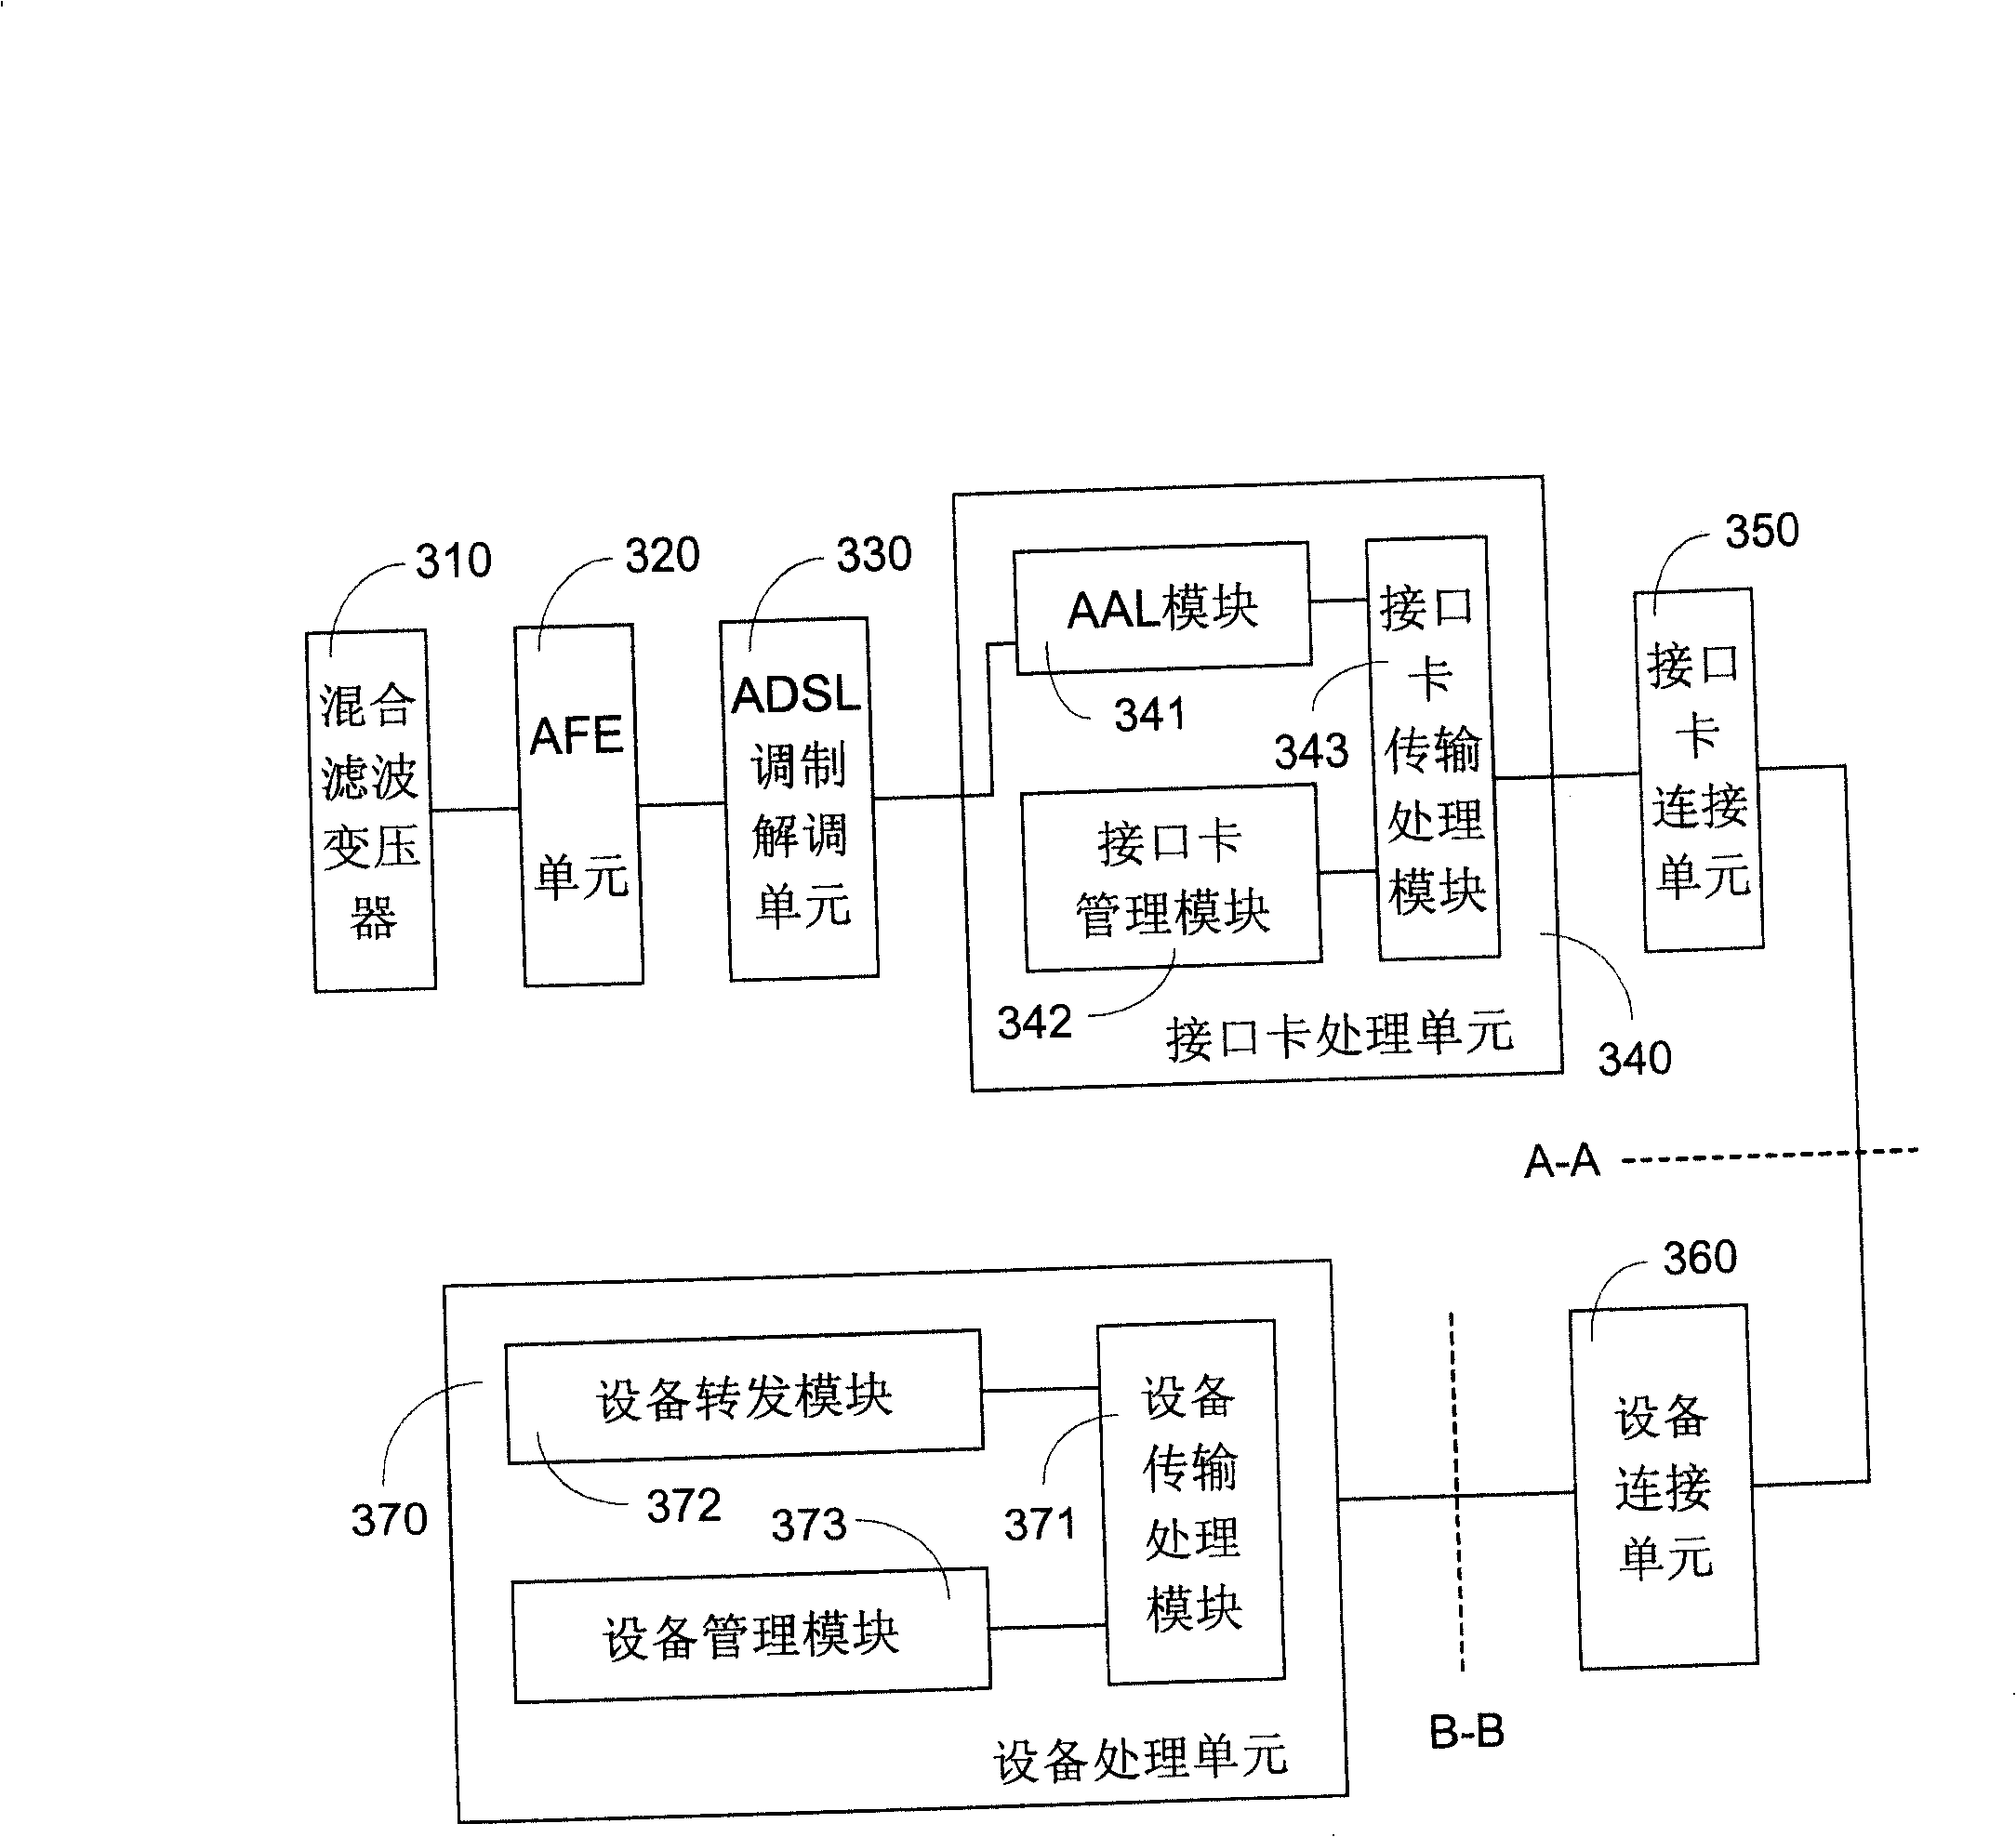 Asymmetrical digital loop routing equipment and interface card